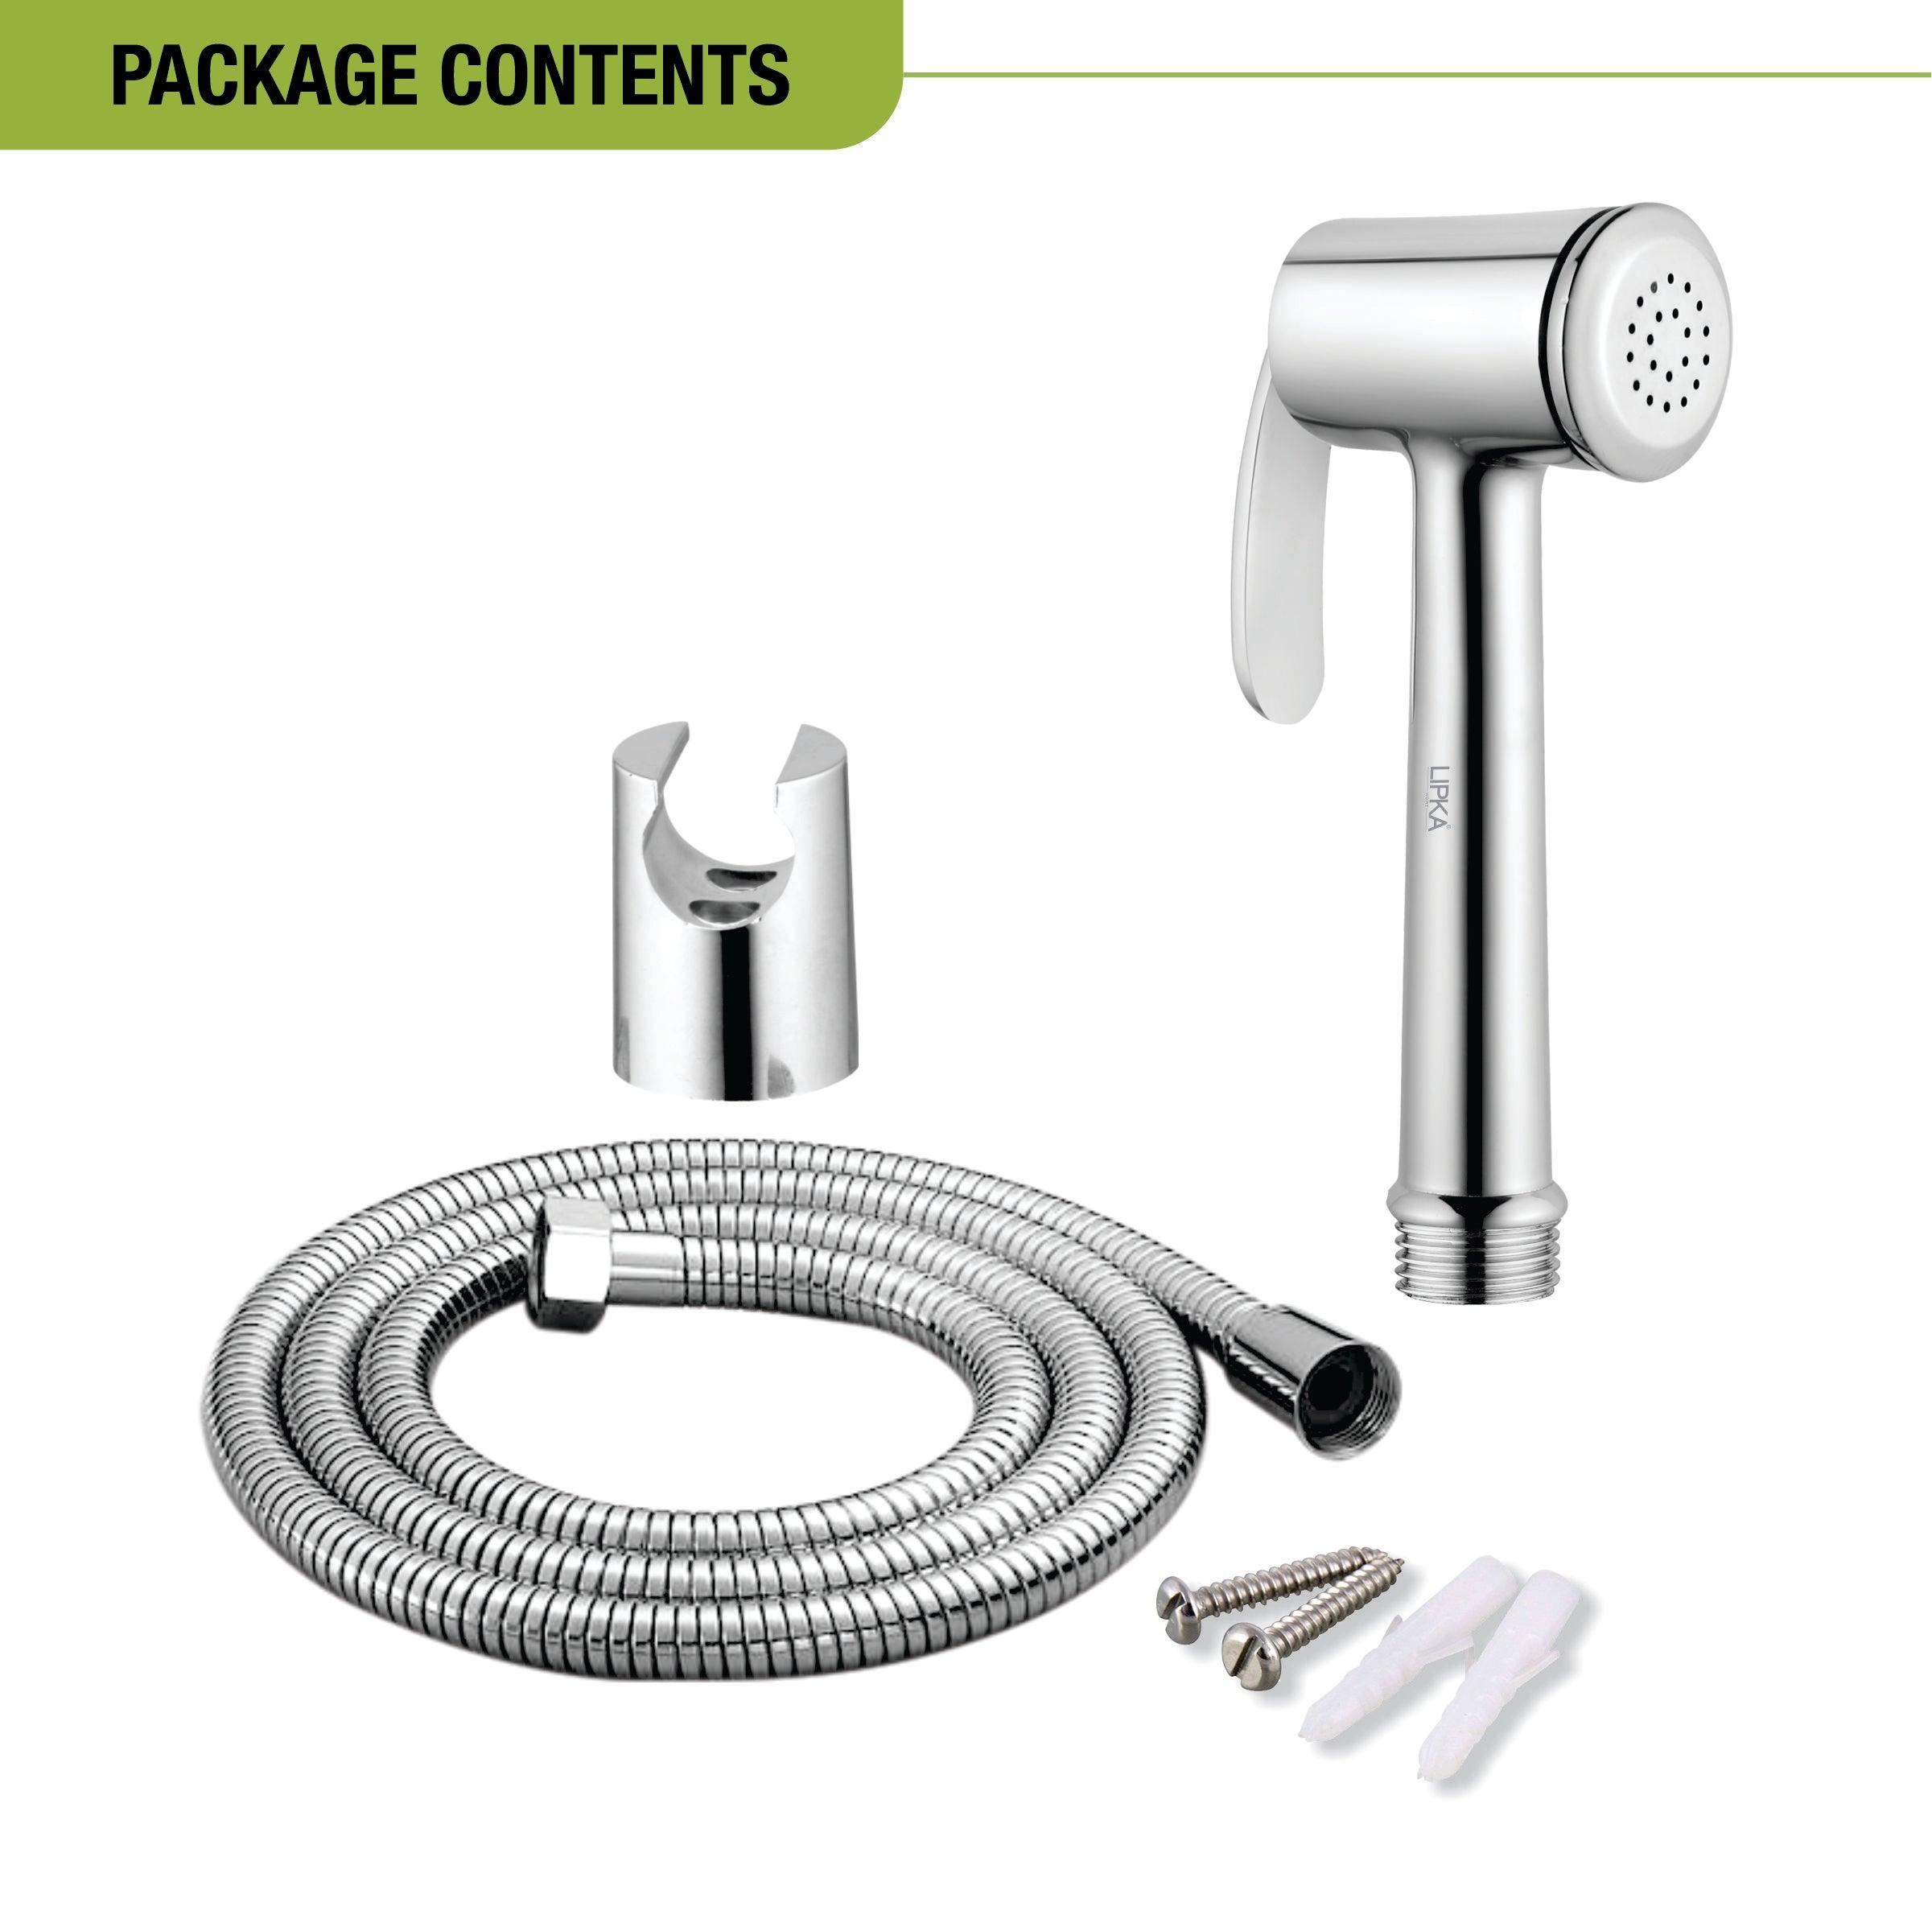 Mac Brass Health Faucet (Complete Set) package includes